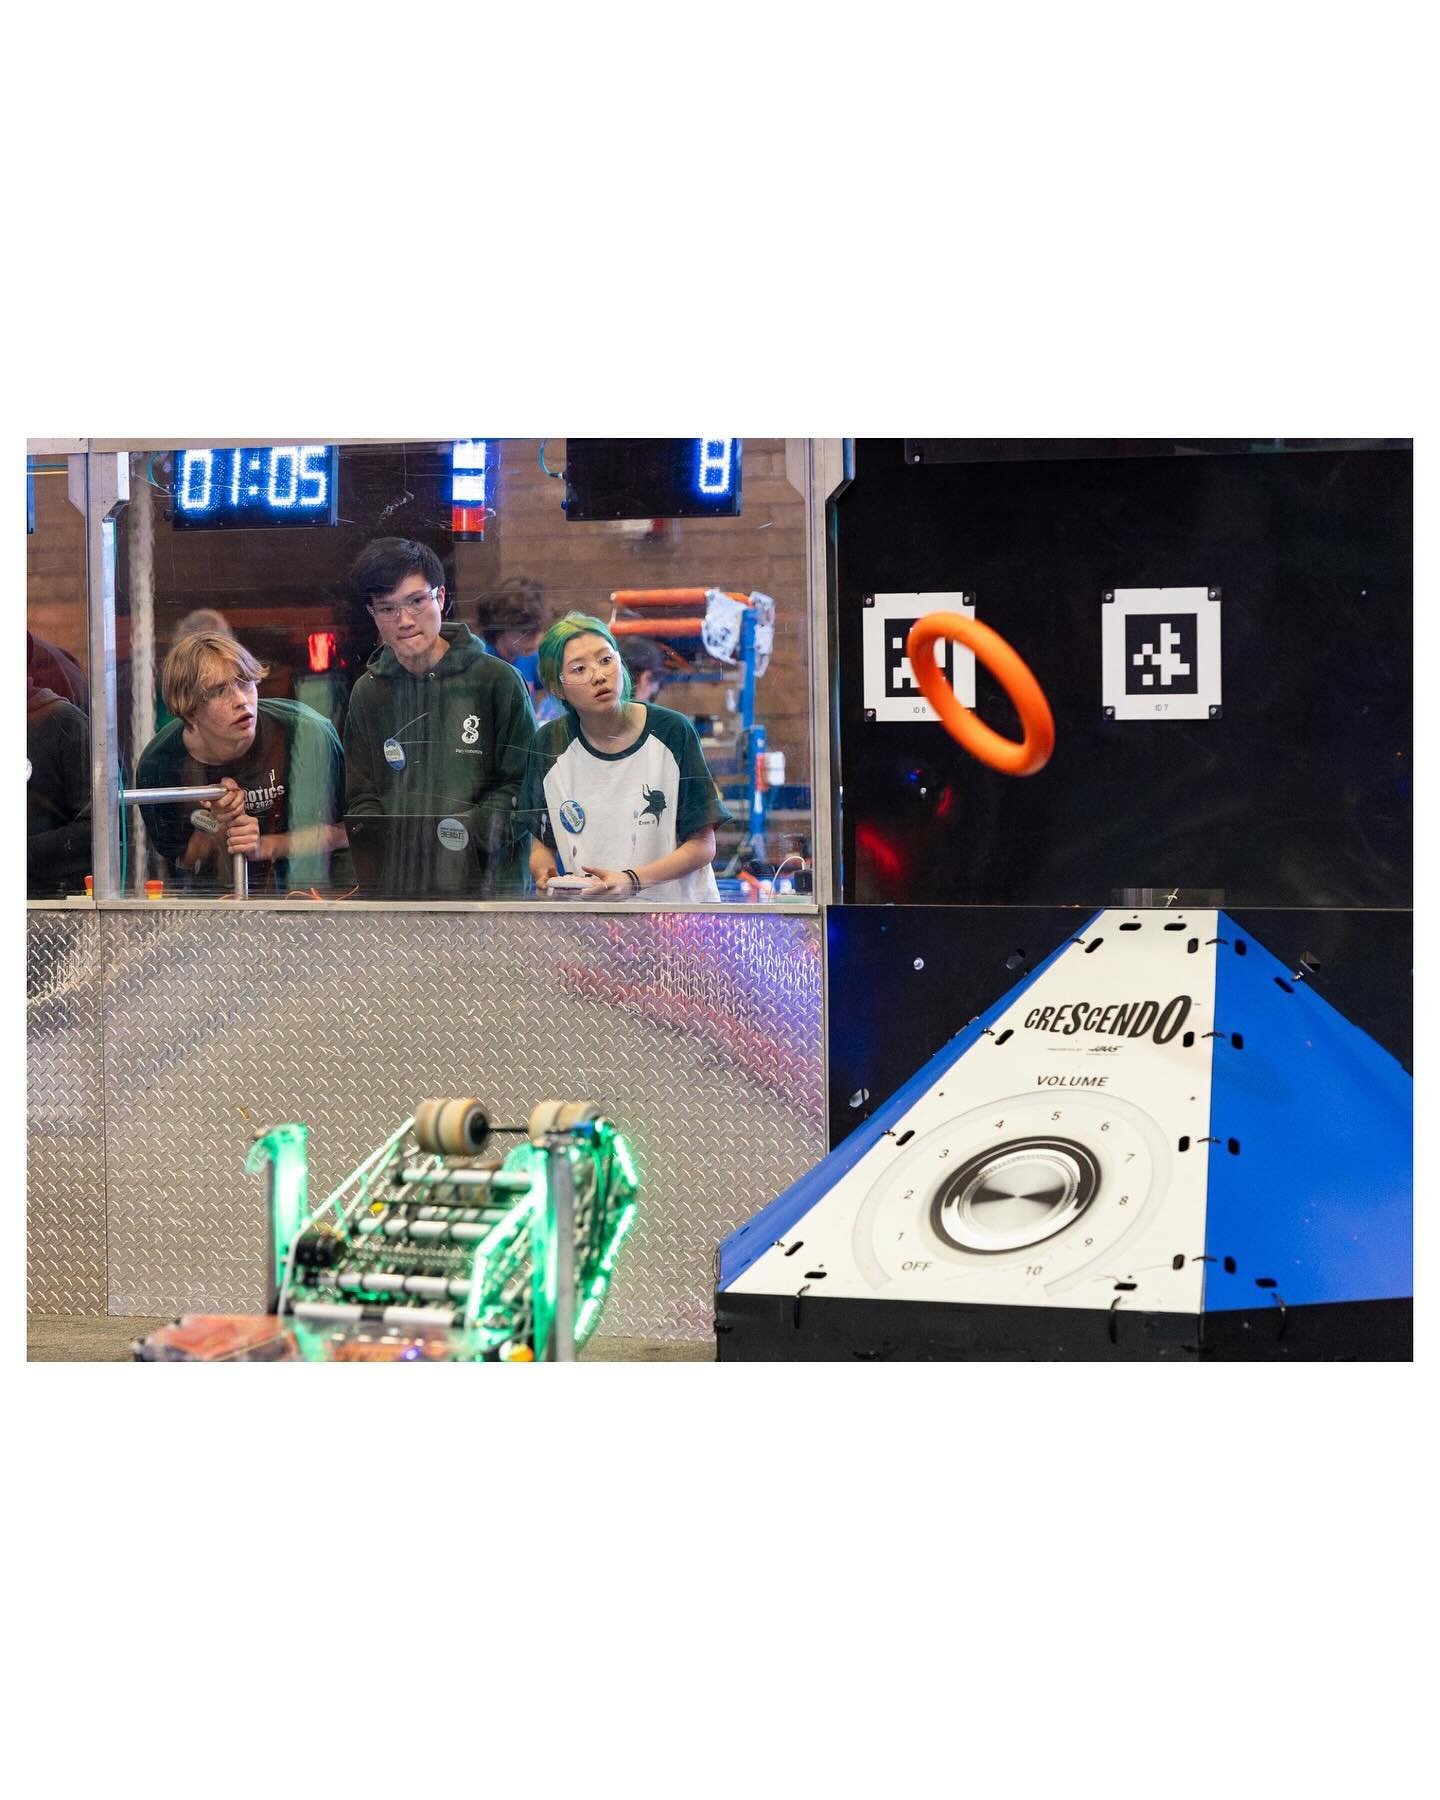 New thing I learned recently: high school robotics competitions are INTENSE ‼️

These teams built and controlled robots that had to zip through a course, pick up/shoot rings, and pull themselves up on chains in team elimination rounds